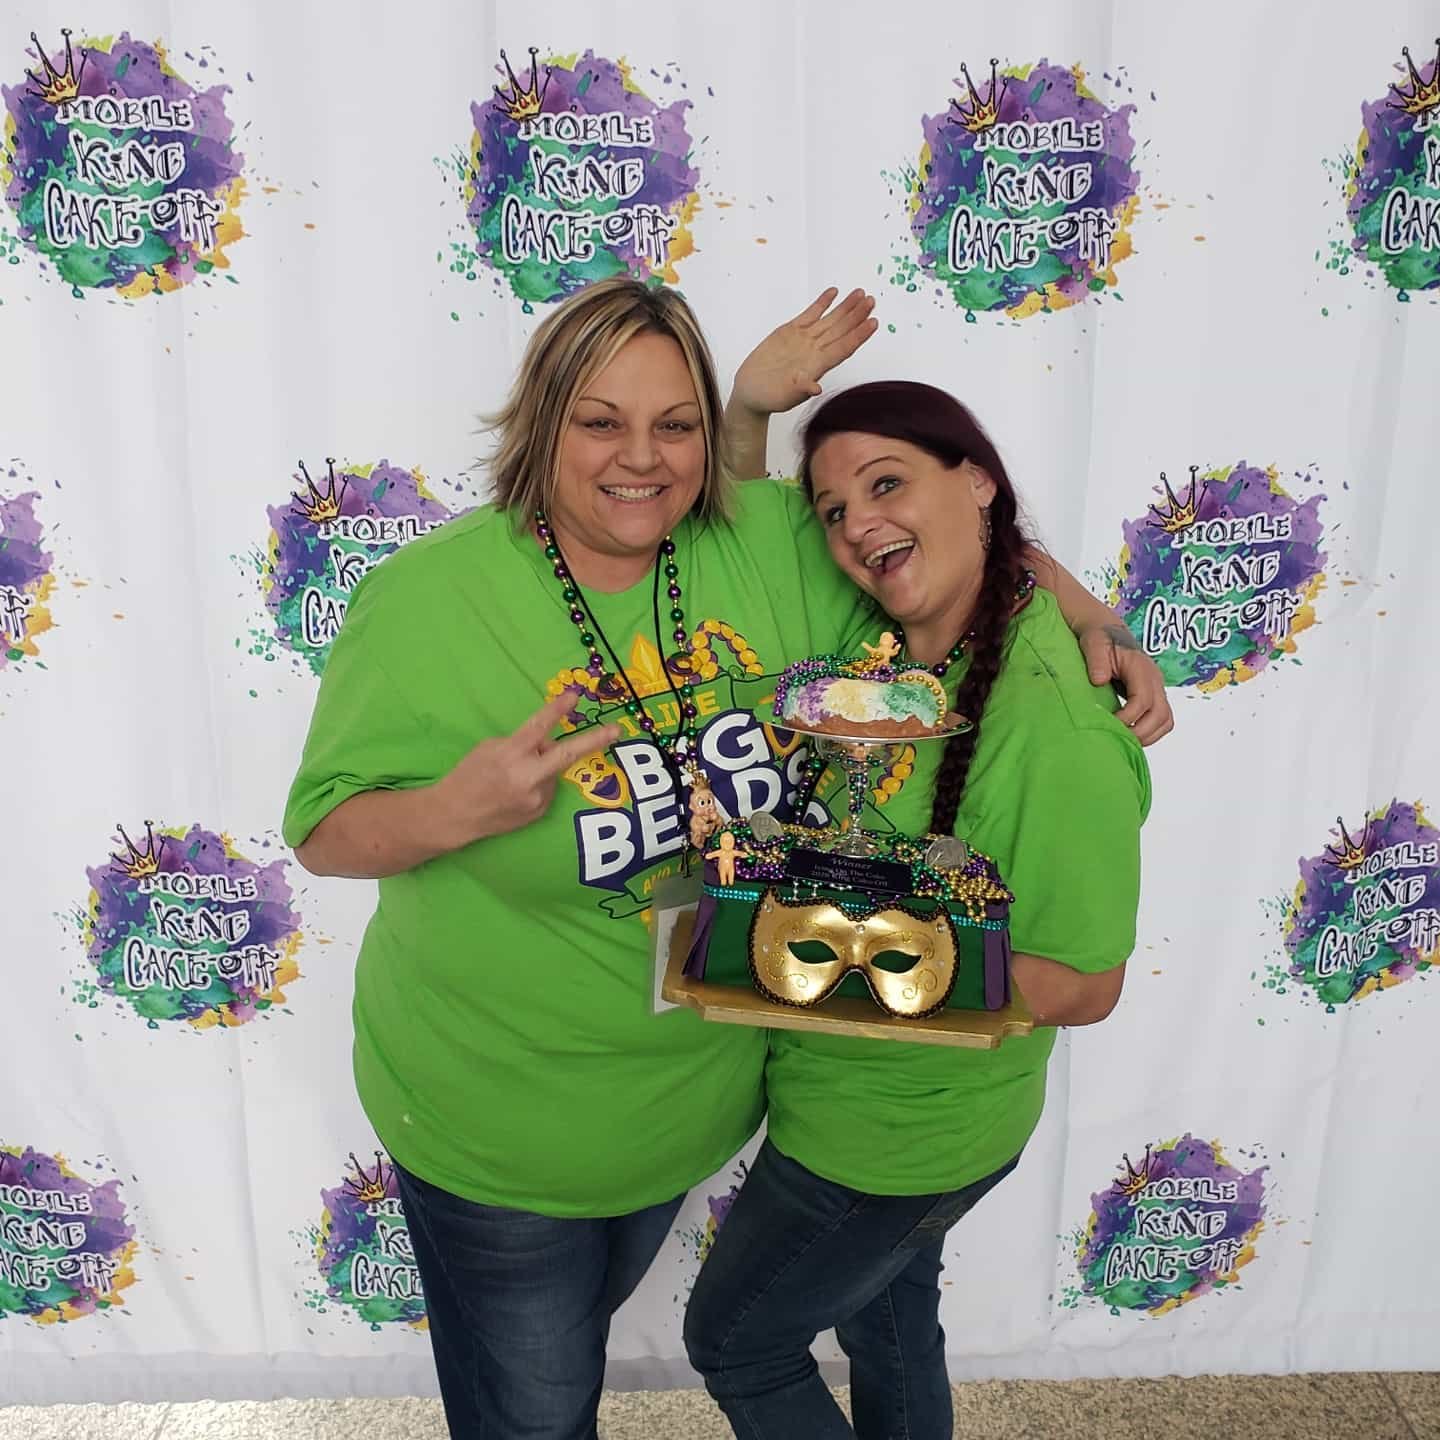 Warehouse Bakery & Donuts in Fairhope has won the King Cake-Off three times. Pictured is their win in 2020.